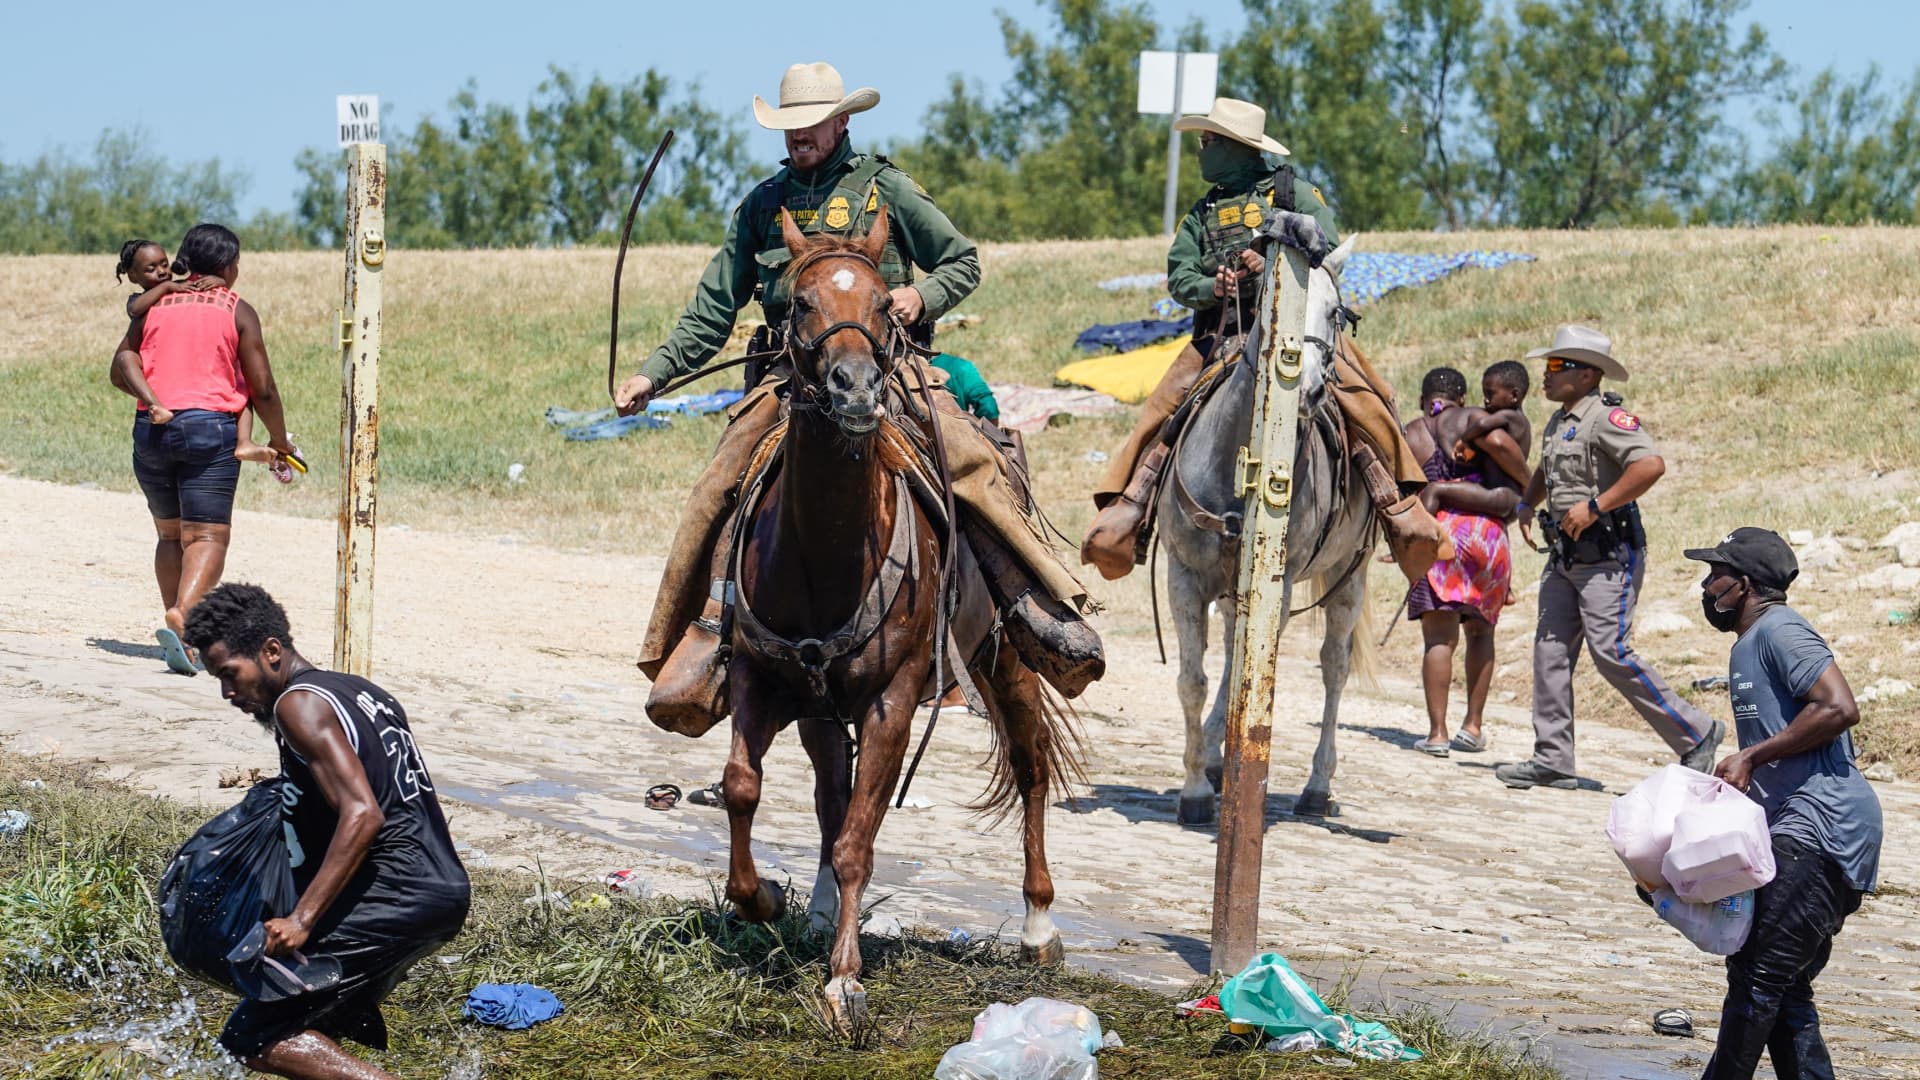 United States Border Patrol agents on horseback try to stop Haitian migrants from entering an encampment on the banks of the Rio Grande near the Acuna Del Rio International Bridge in Del Rio, Texas on September 19, 2021.